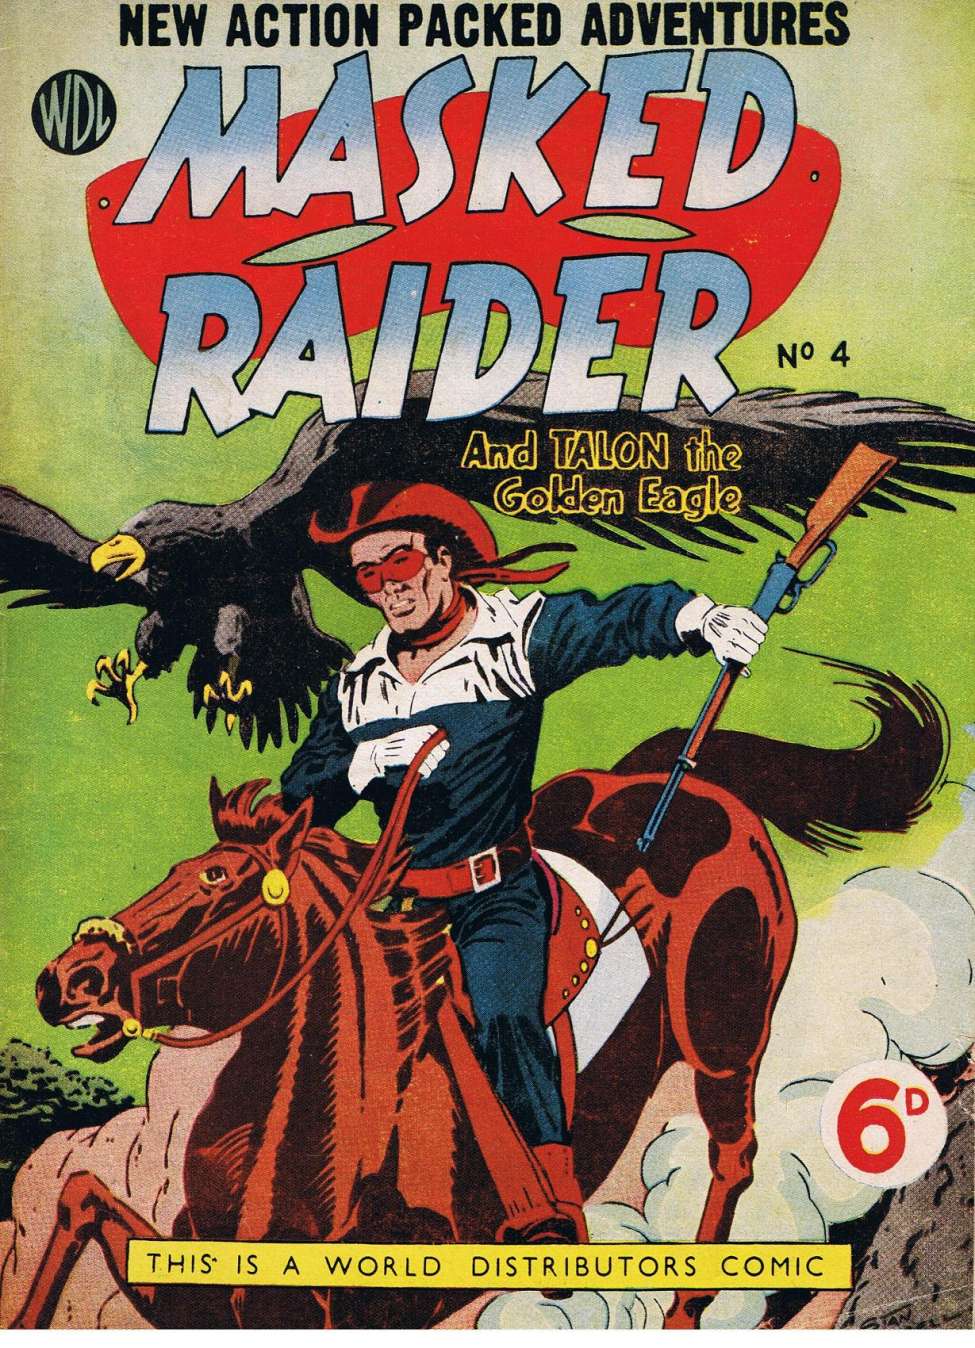 Book Cover For Masked Raider 4